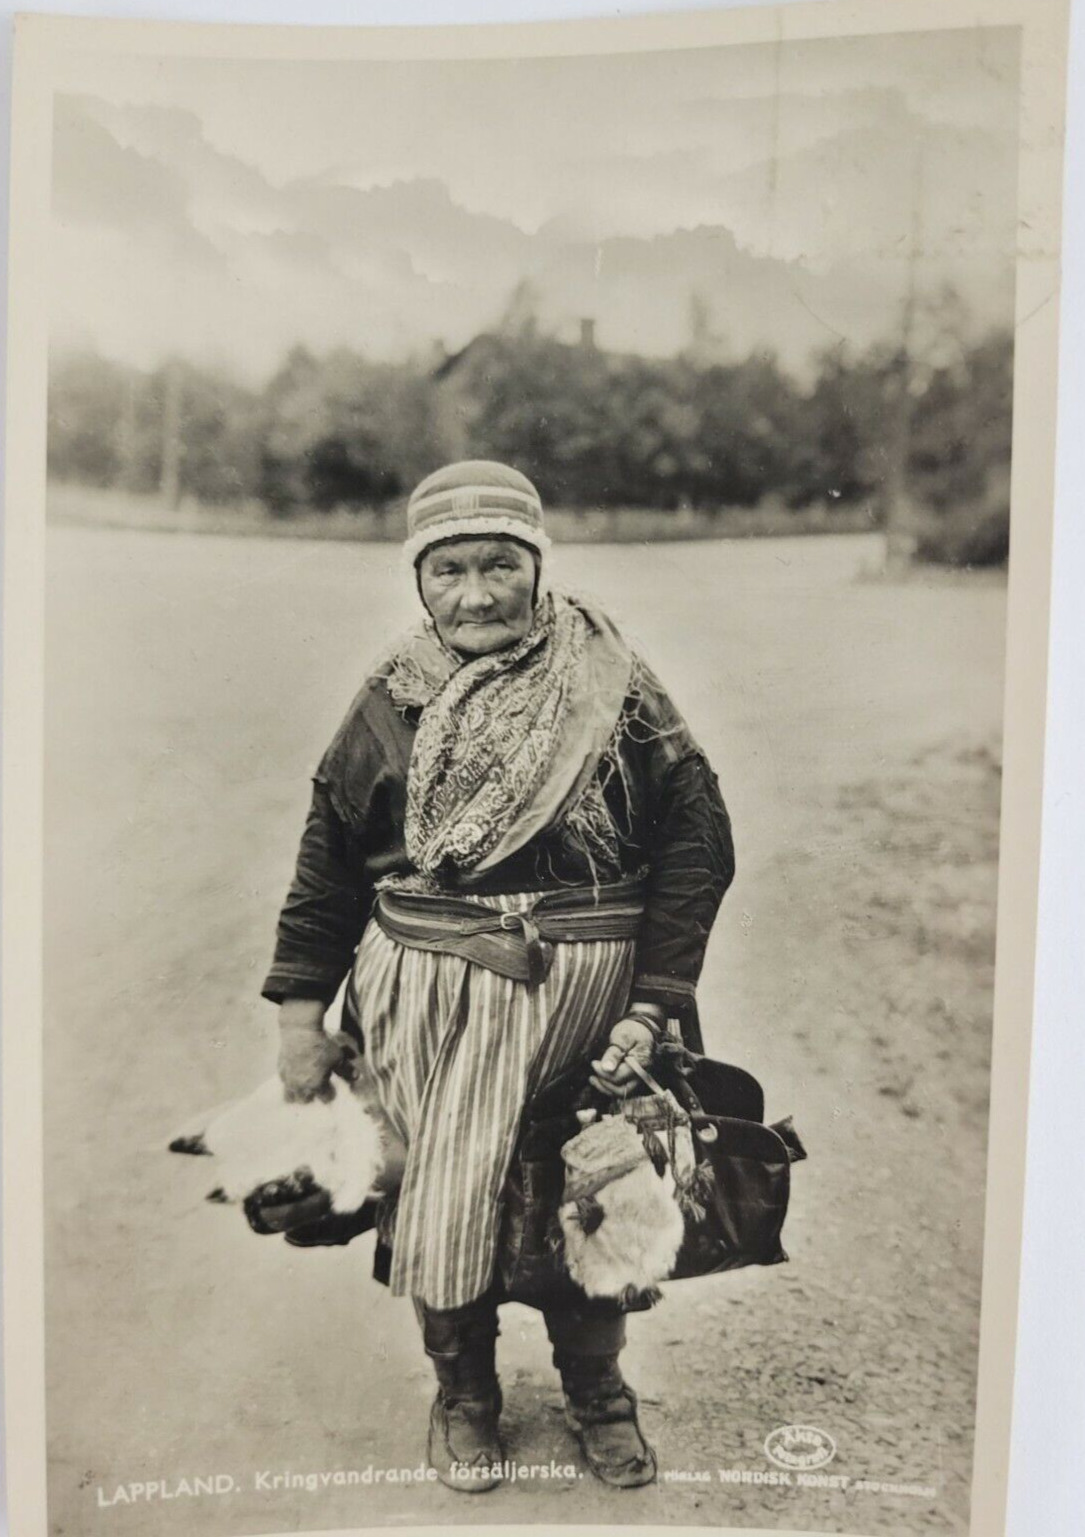 Lappland Women Native Ethnic Clothes Nomadic Sweden Postcard RPPC posted 1950